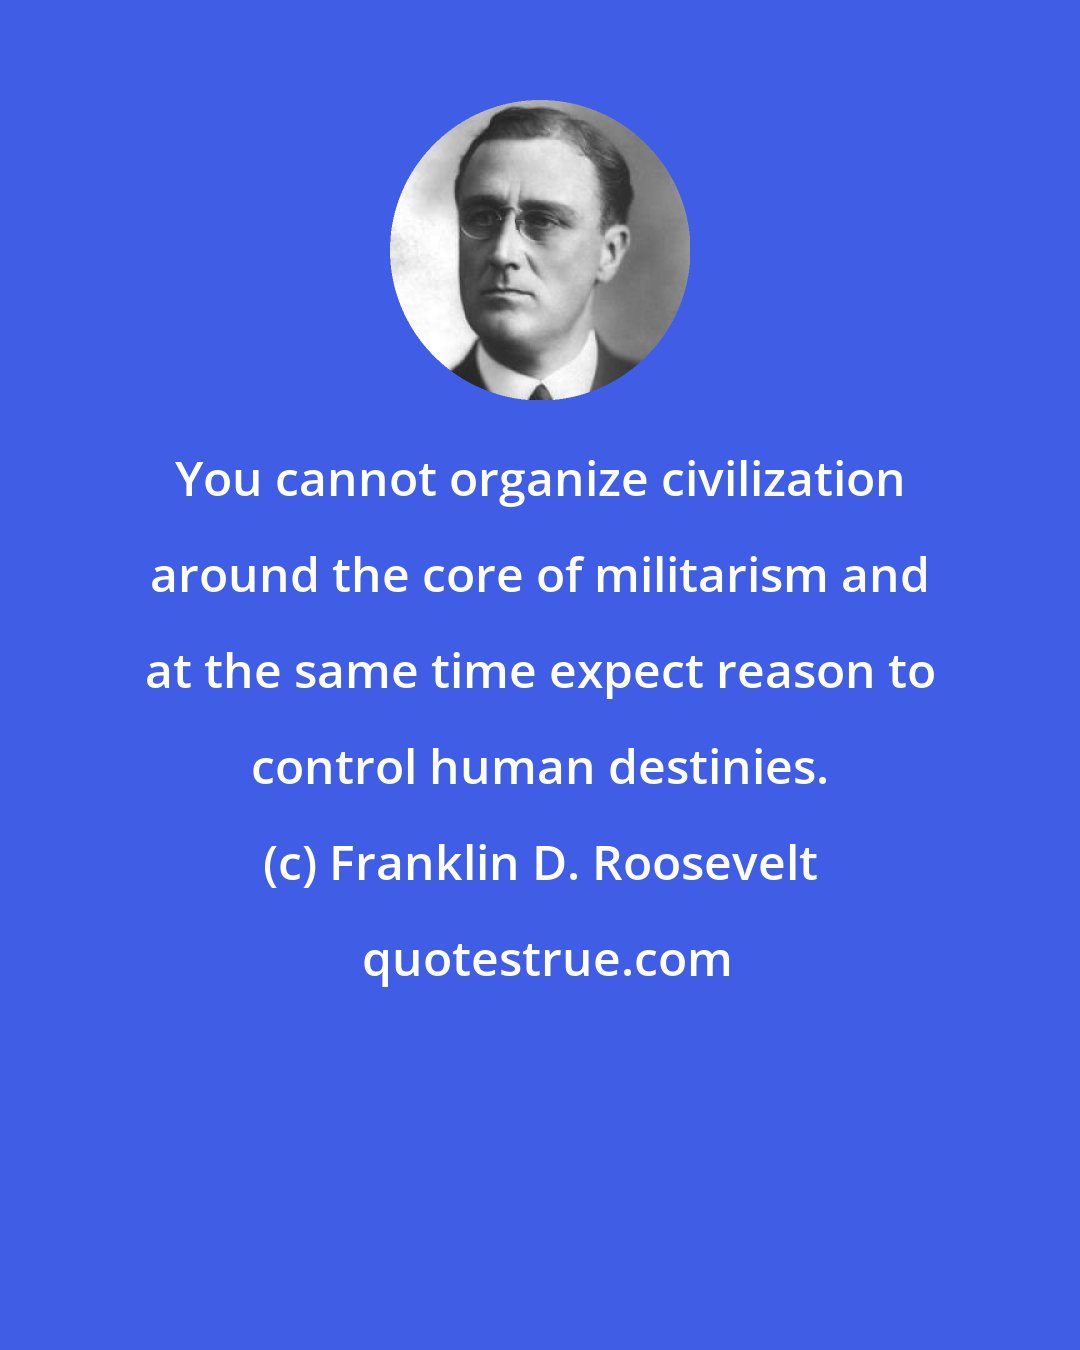 Franklin D. Roosevelt: You cannot organize civilization around the core of militarism and at the same time expect reason to control human destinies.